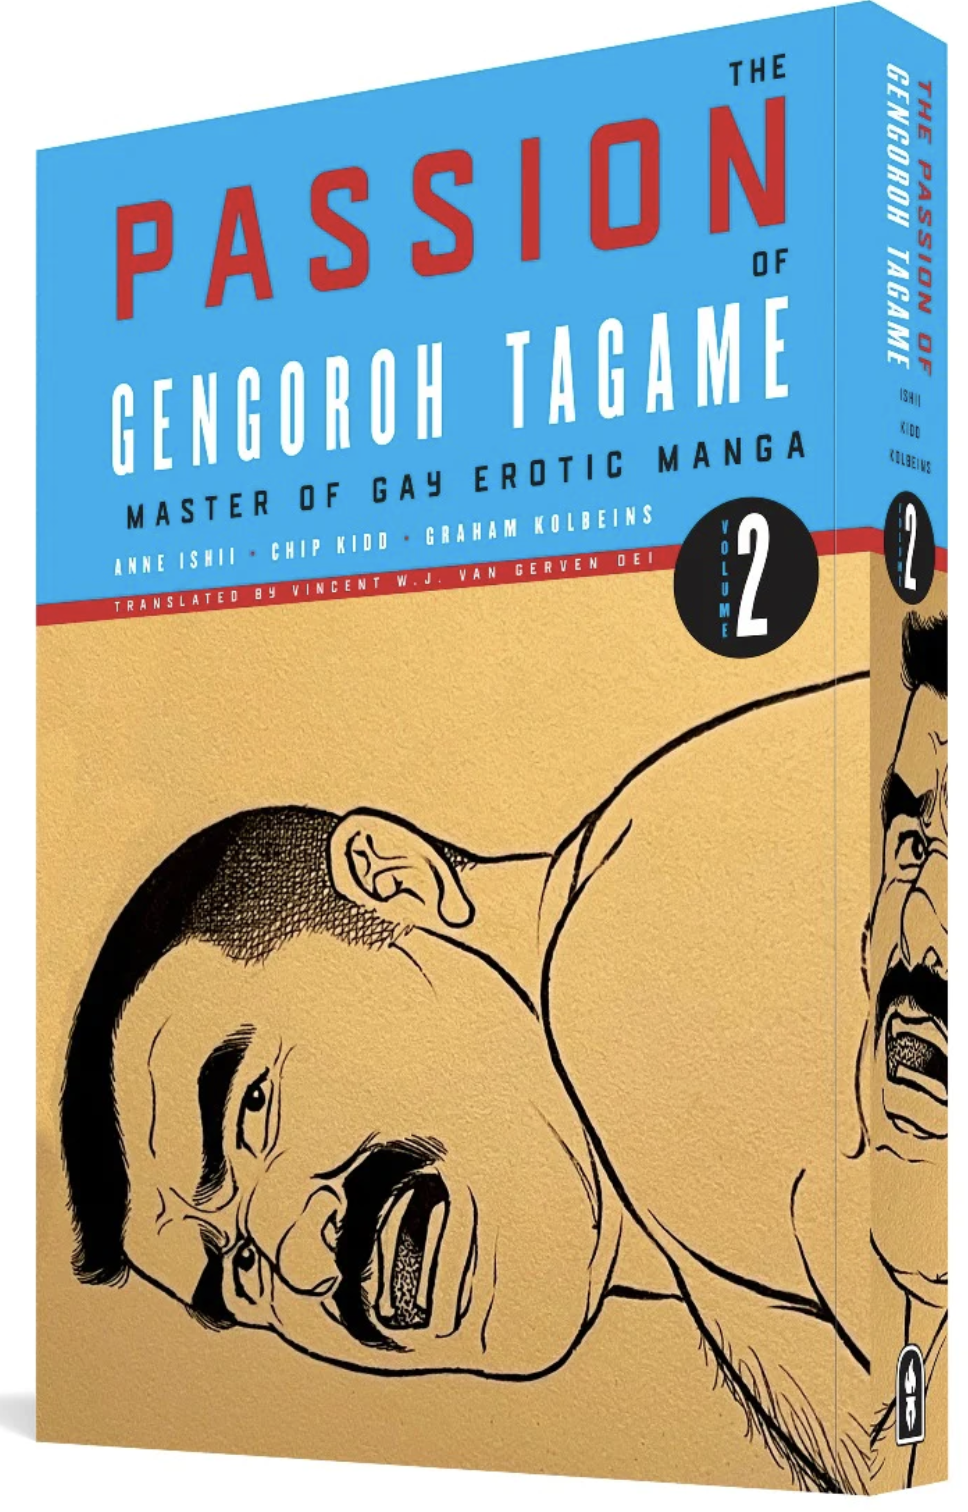 The Passion of Gengoroh Tagame vol. 2